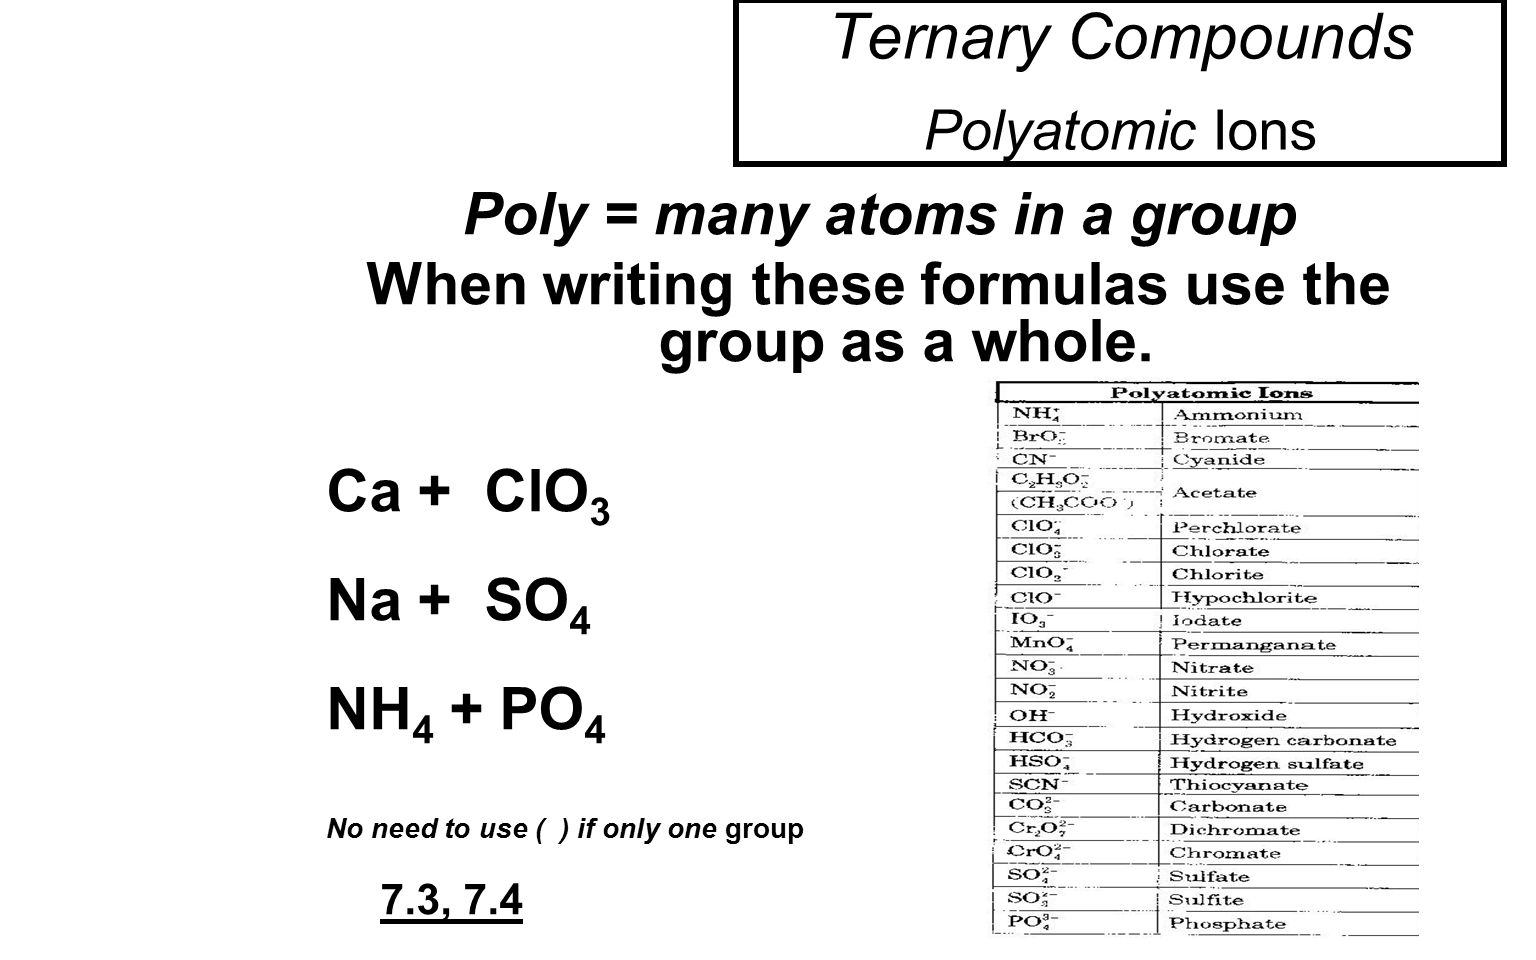 How to Write Formulas for Ionic Compounds with Polyatomic Ions